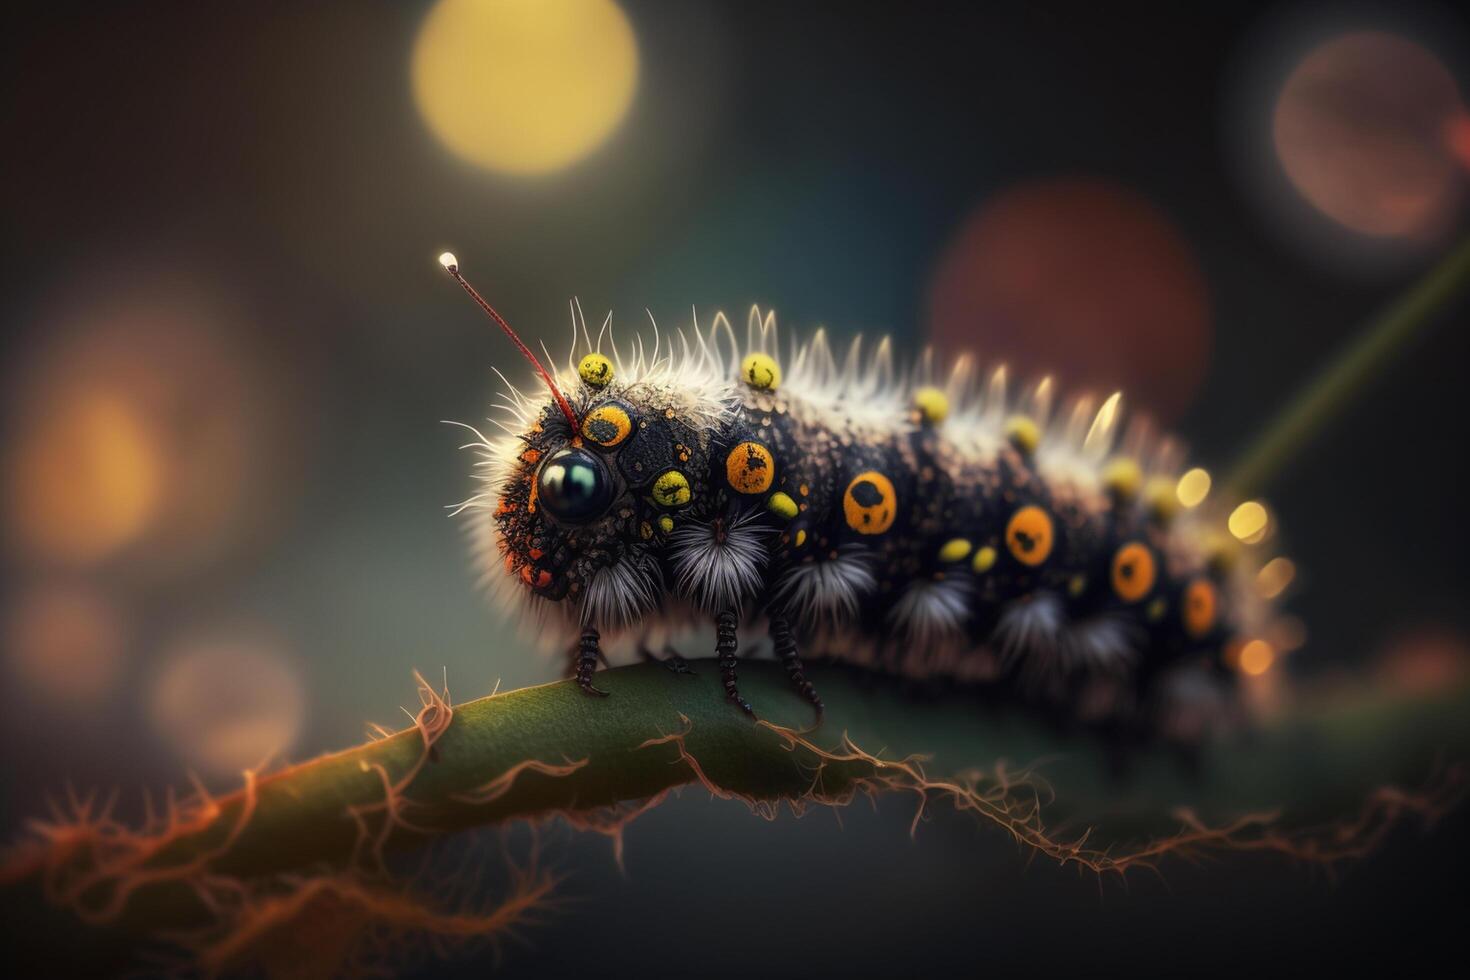 Hyperrealistic Illustration of a Caterpillar, Enlarged Close-up photo